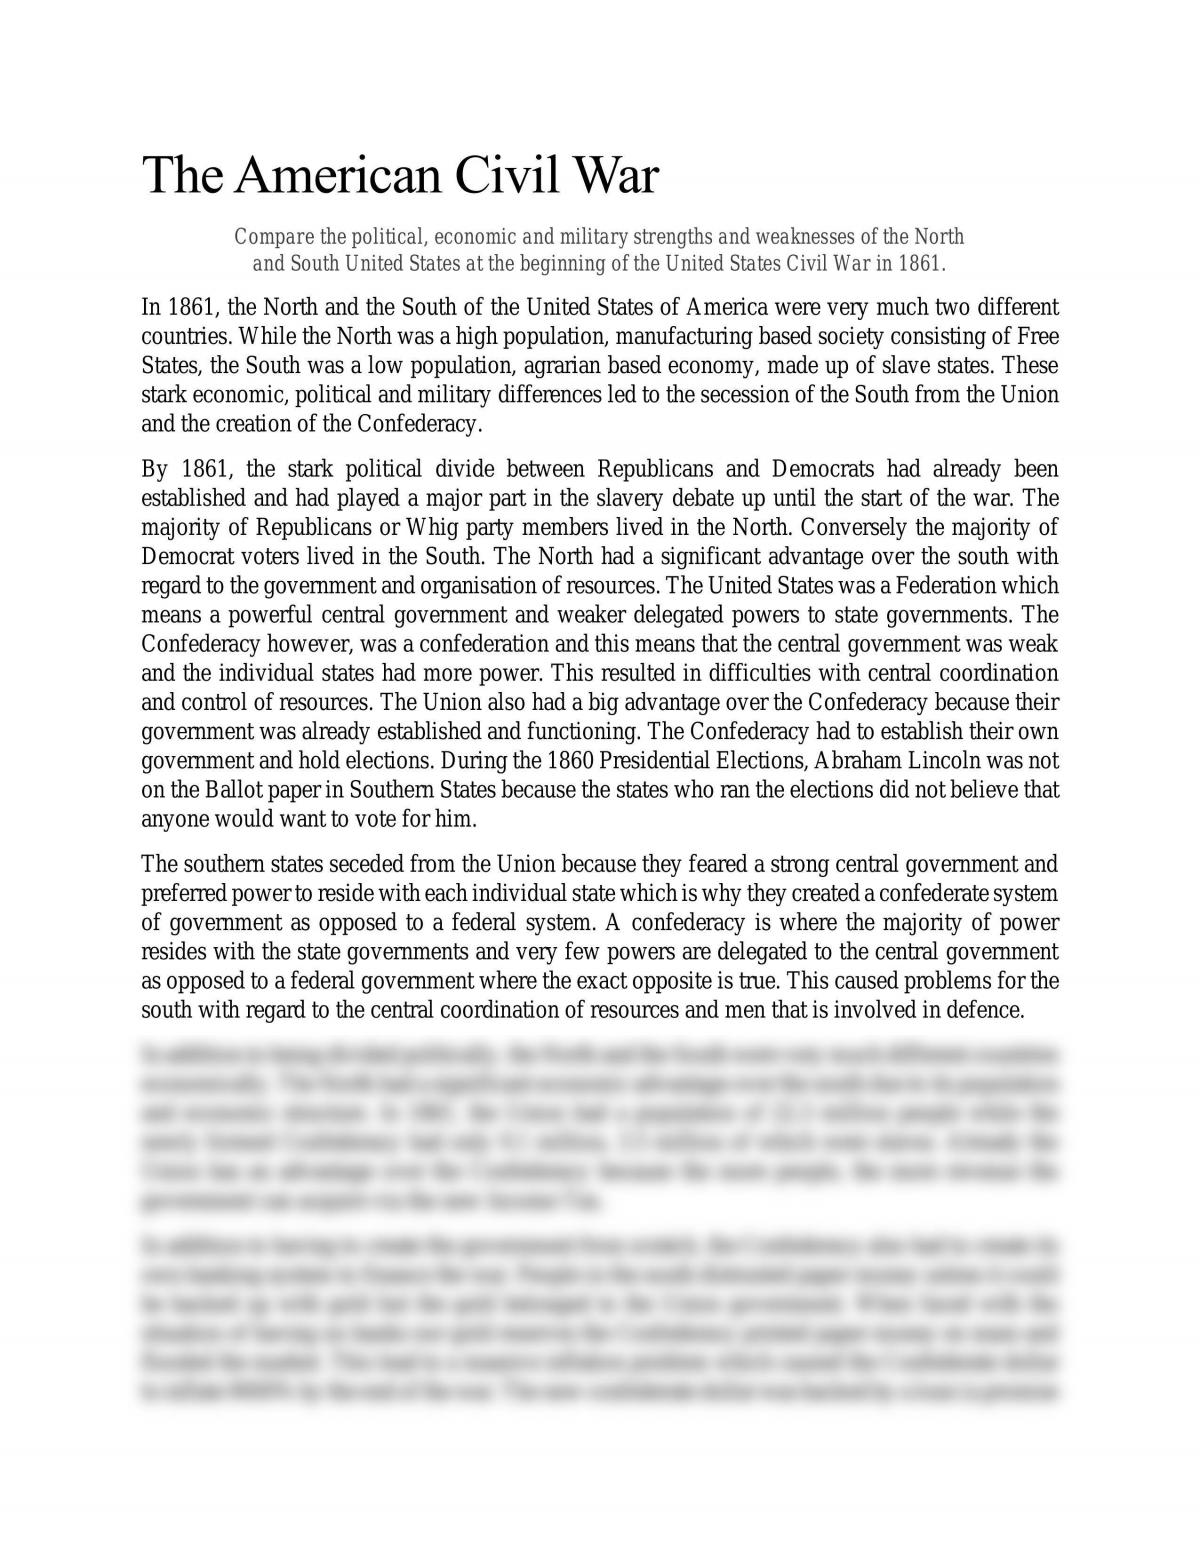 hook for an essay about the civil war